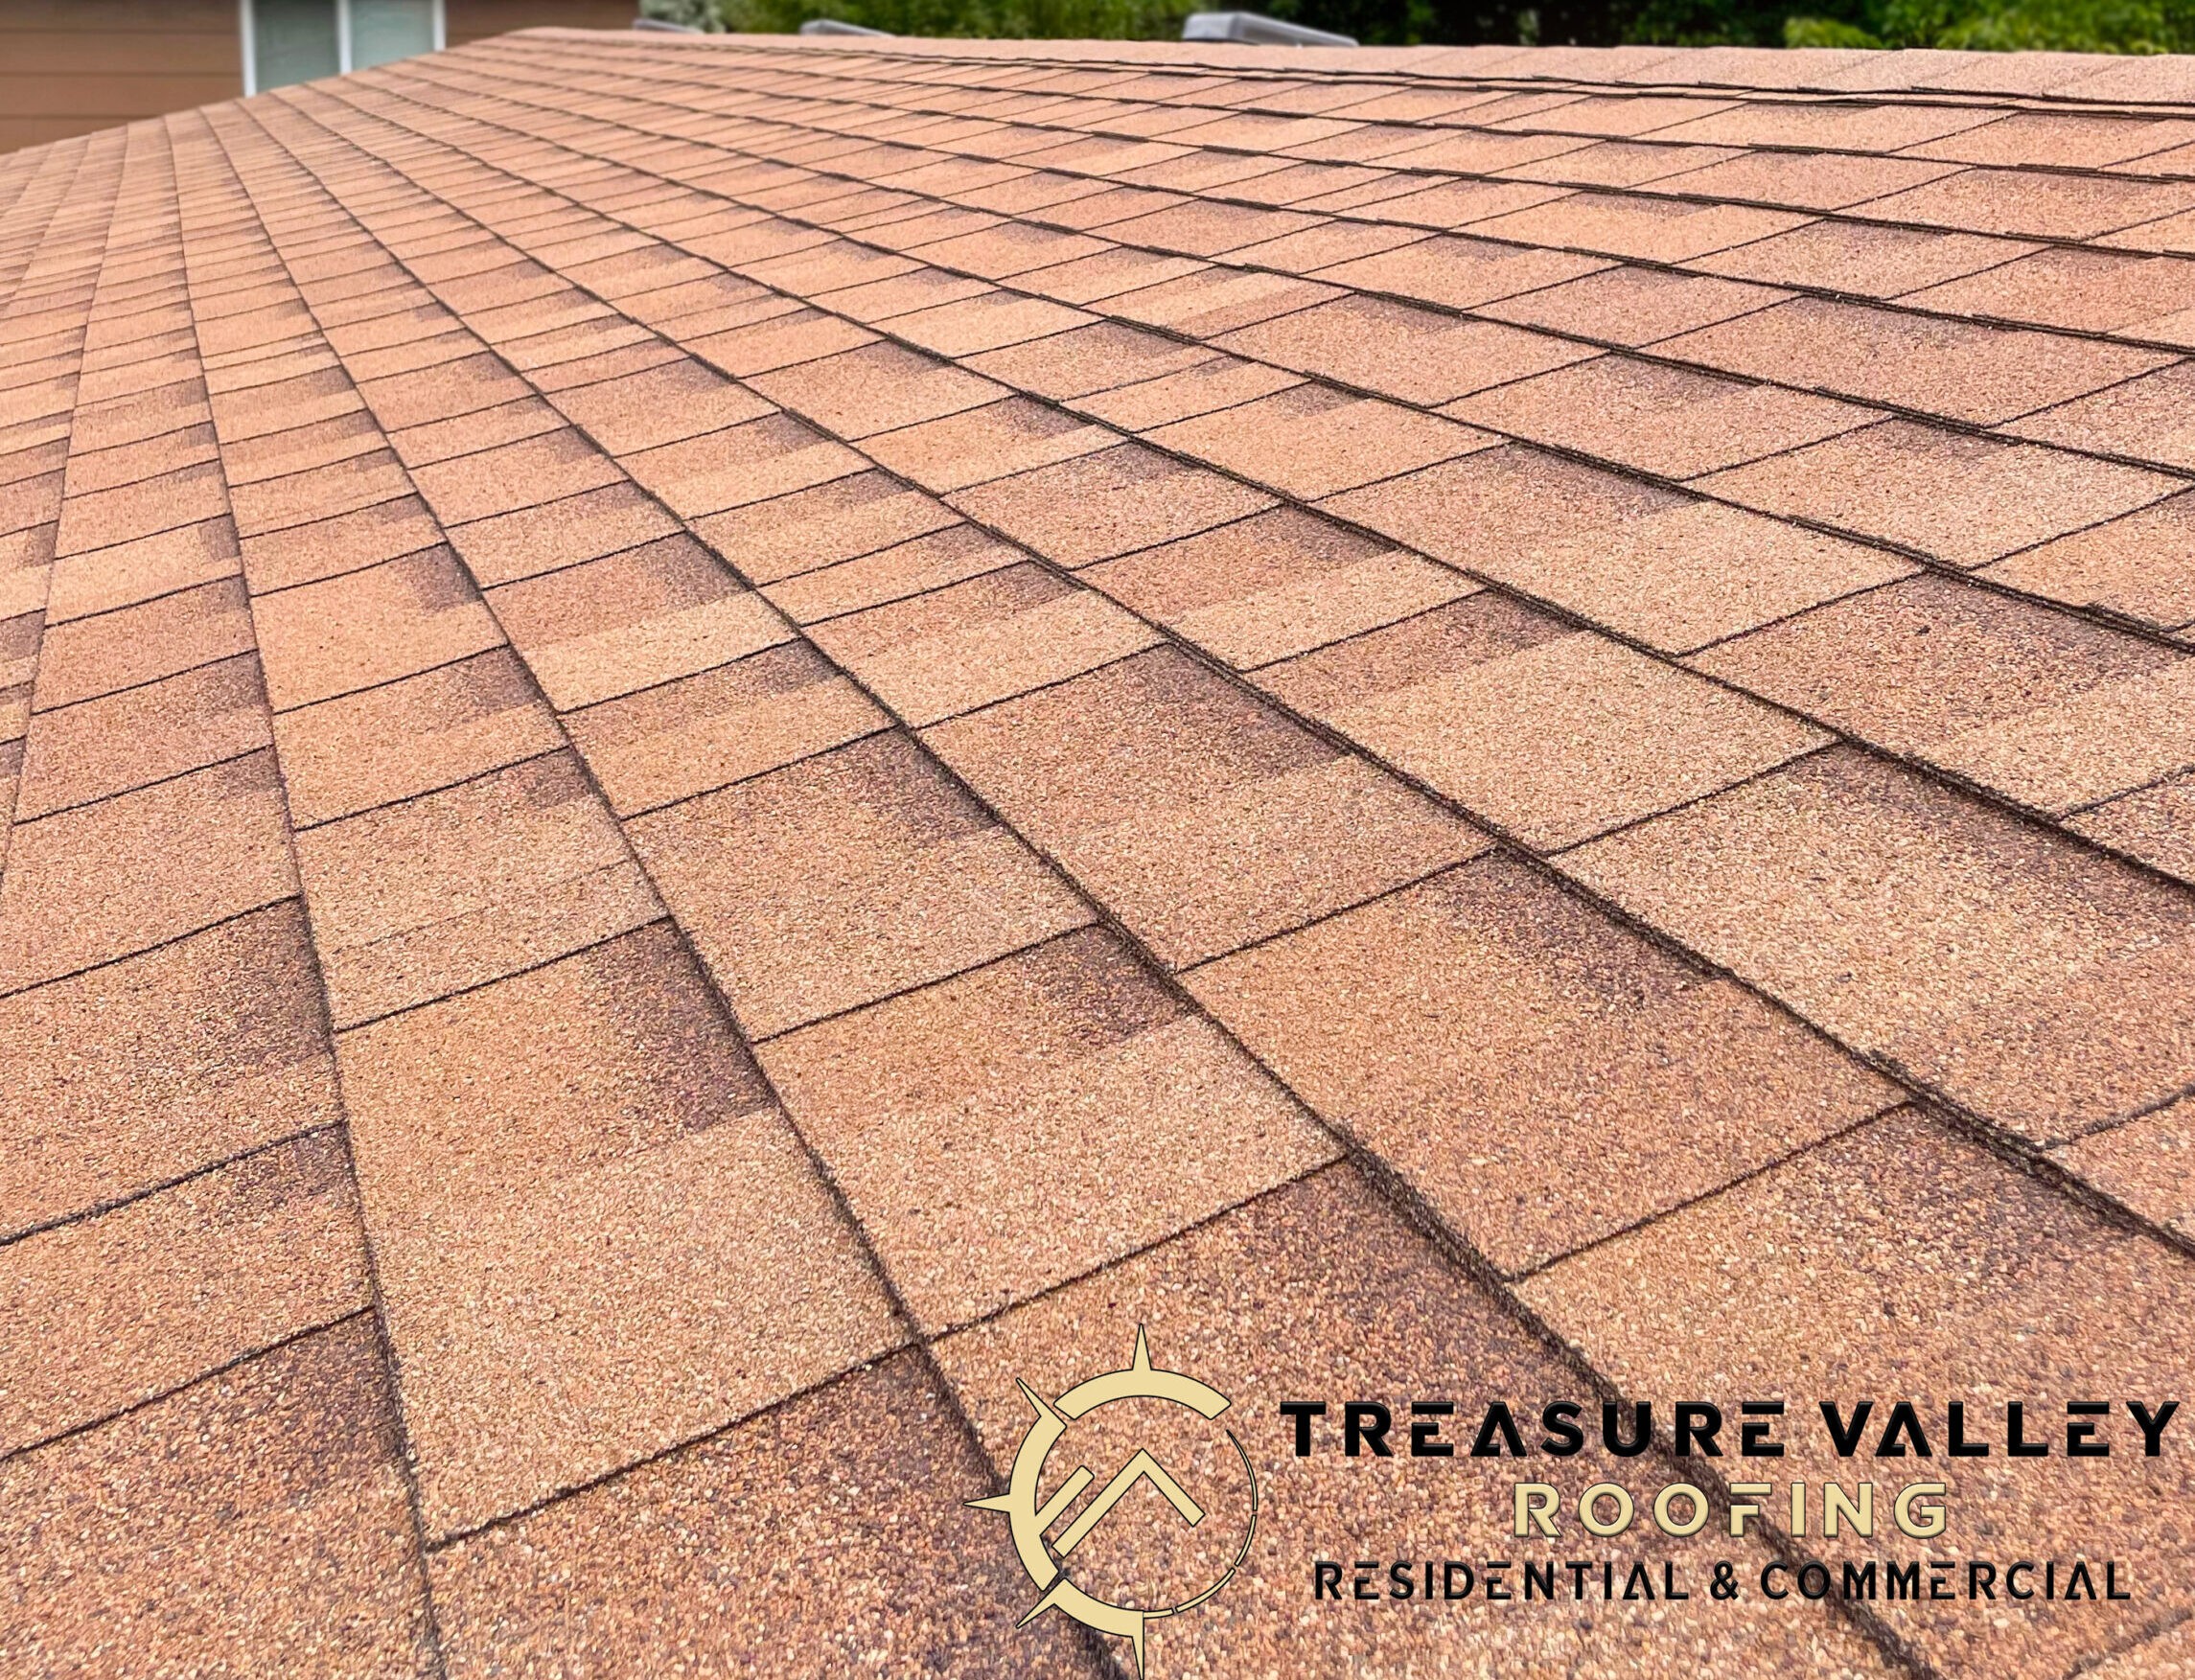 Roofing materials for treasure valley roofing replacement shingle, tile, metal, flat roof